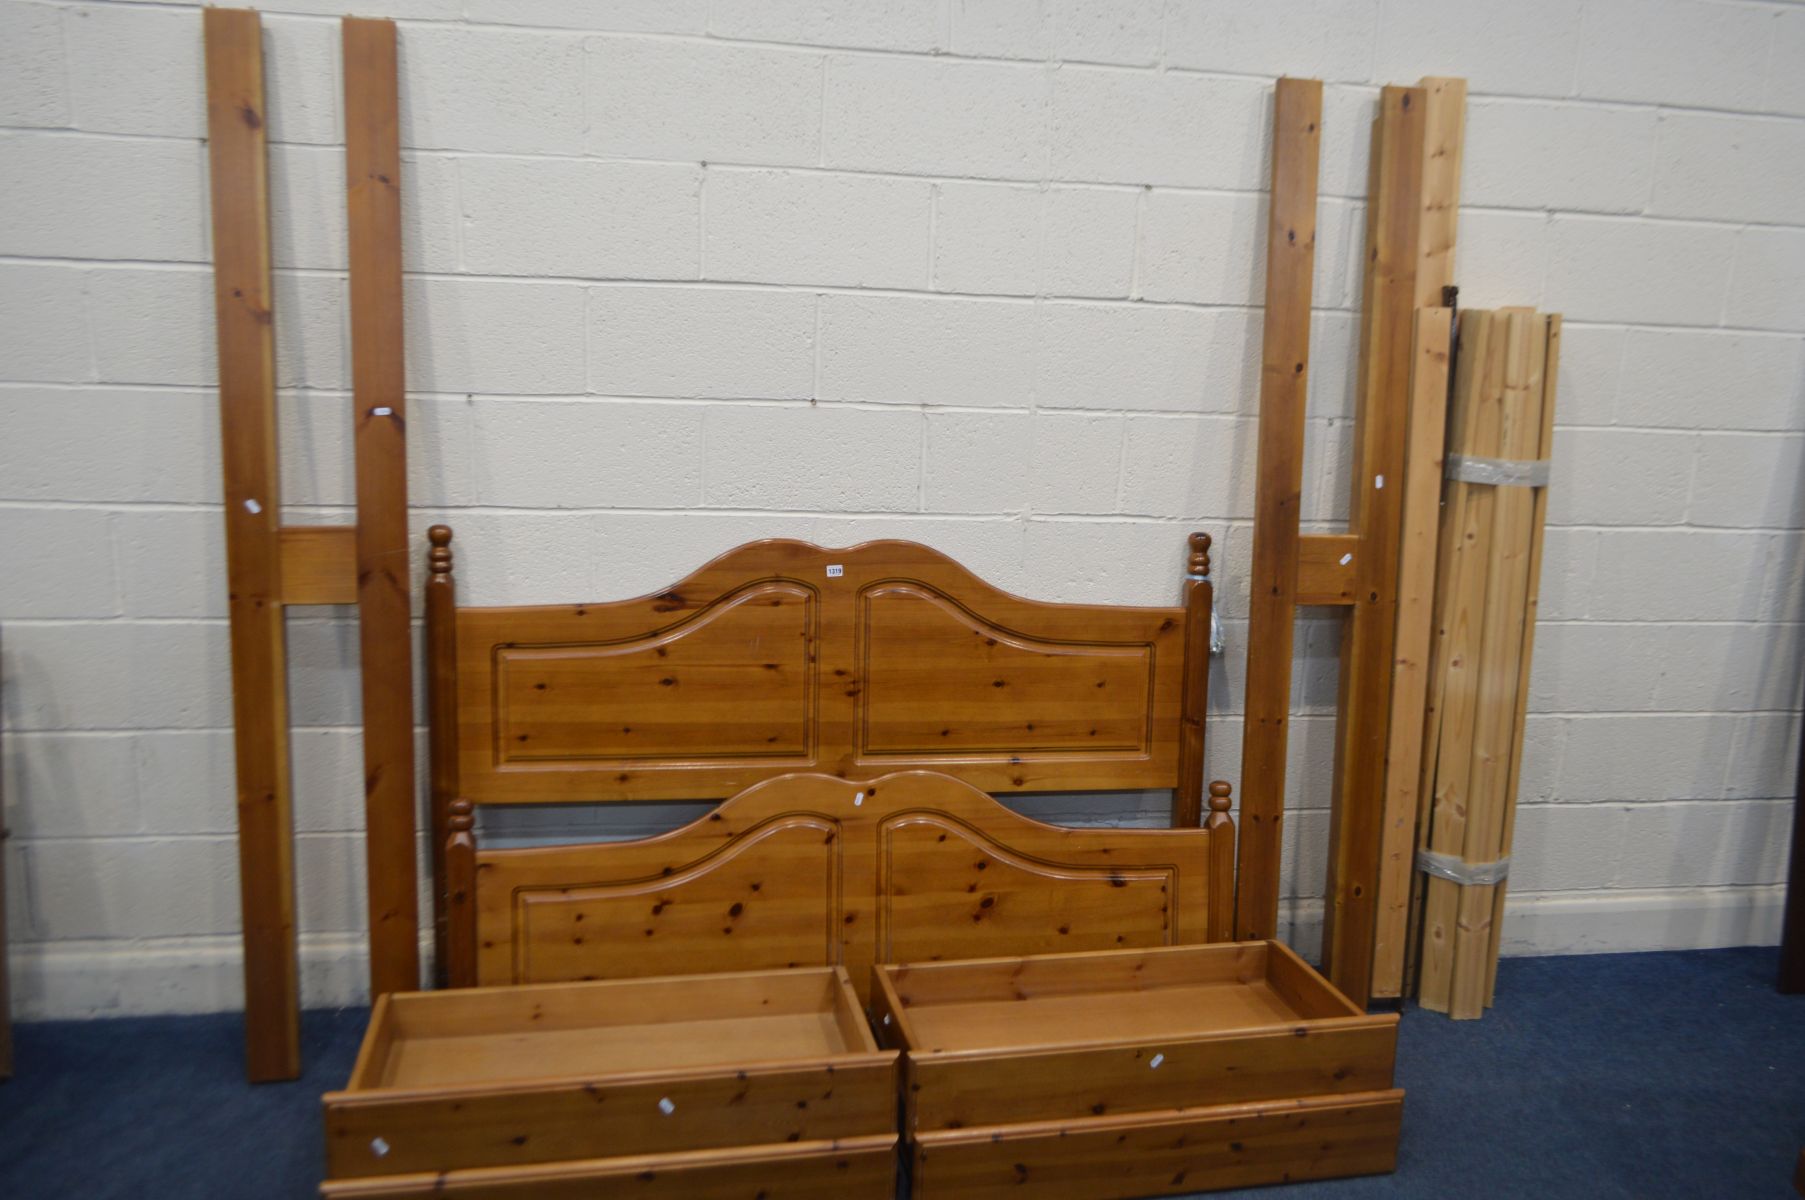 A PINE 5FT BEDSTEAD with side rails containing two drawers each, slats and bolts